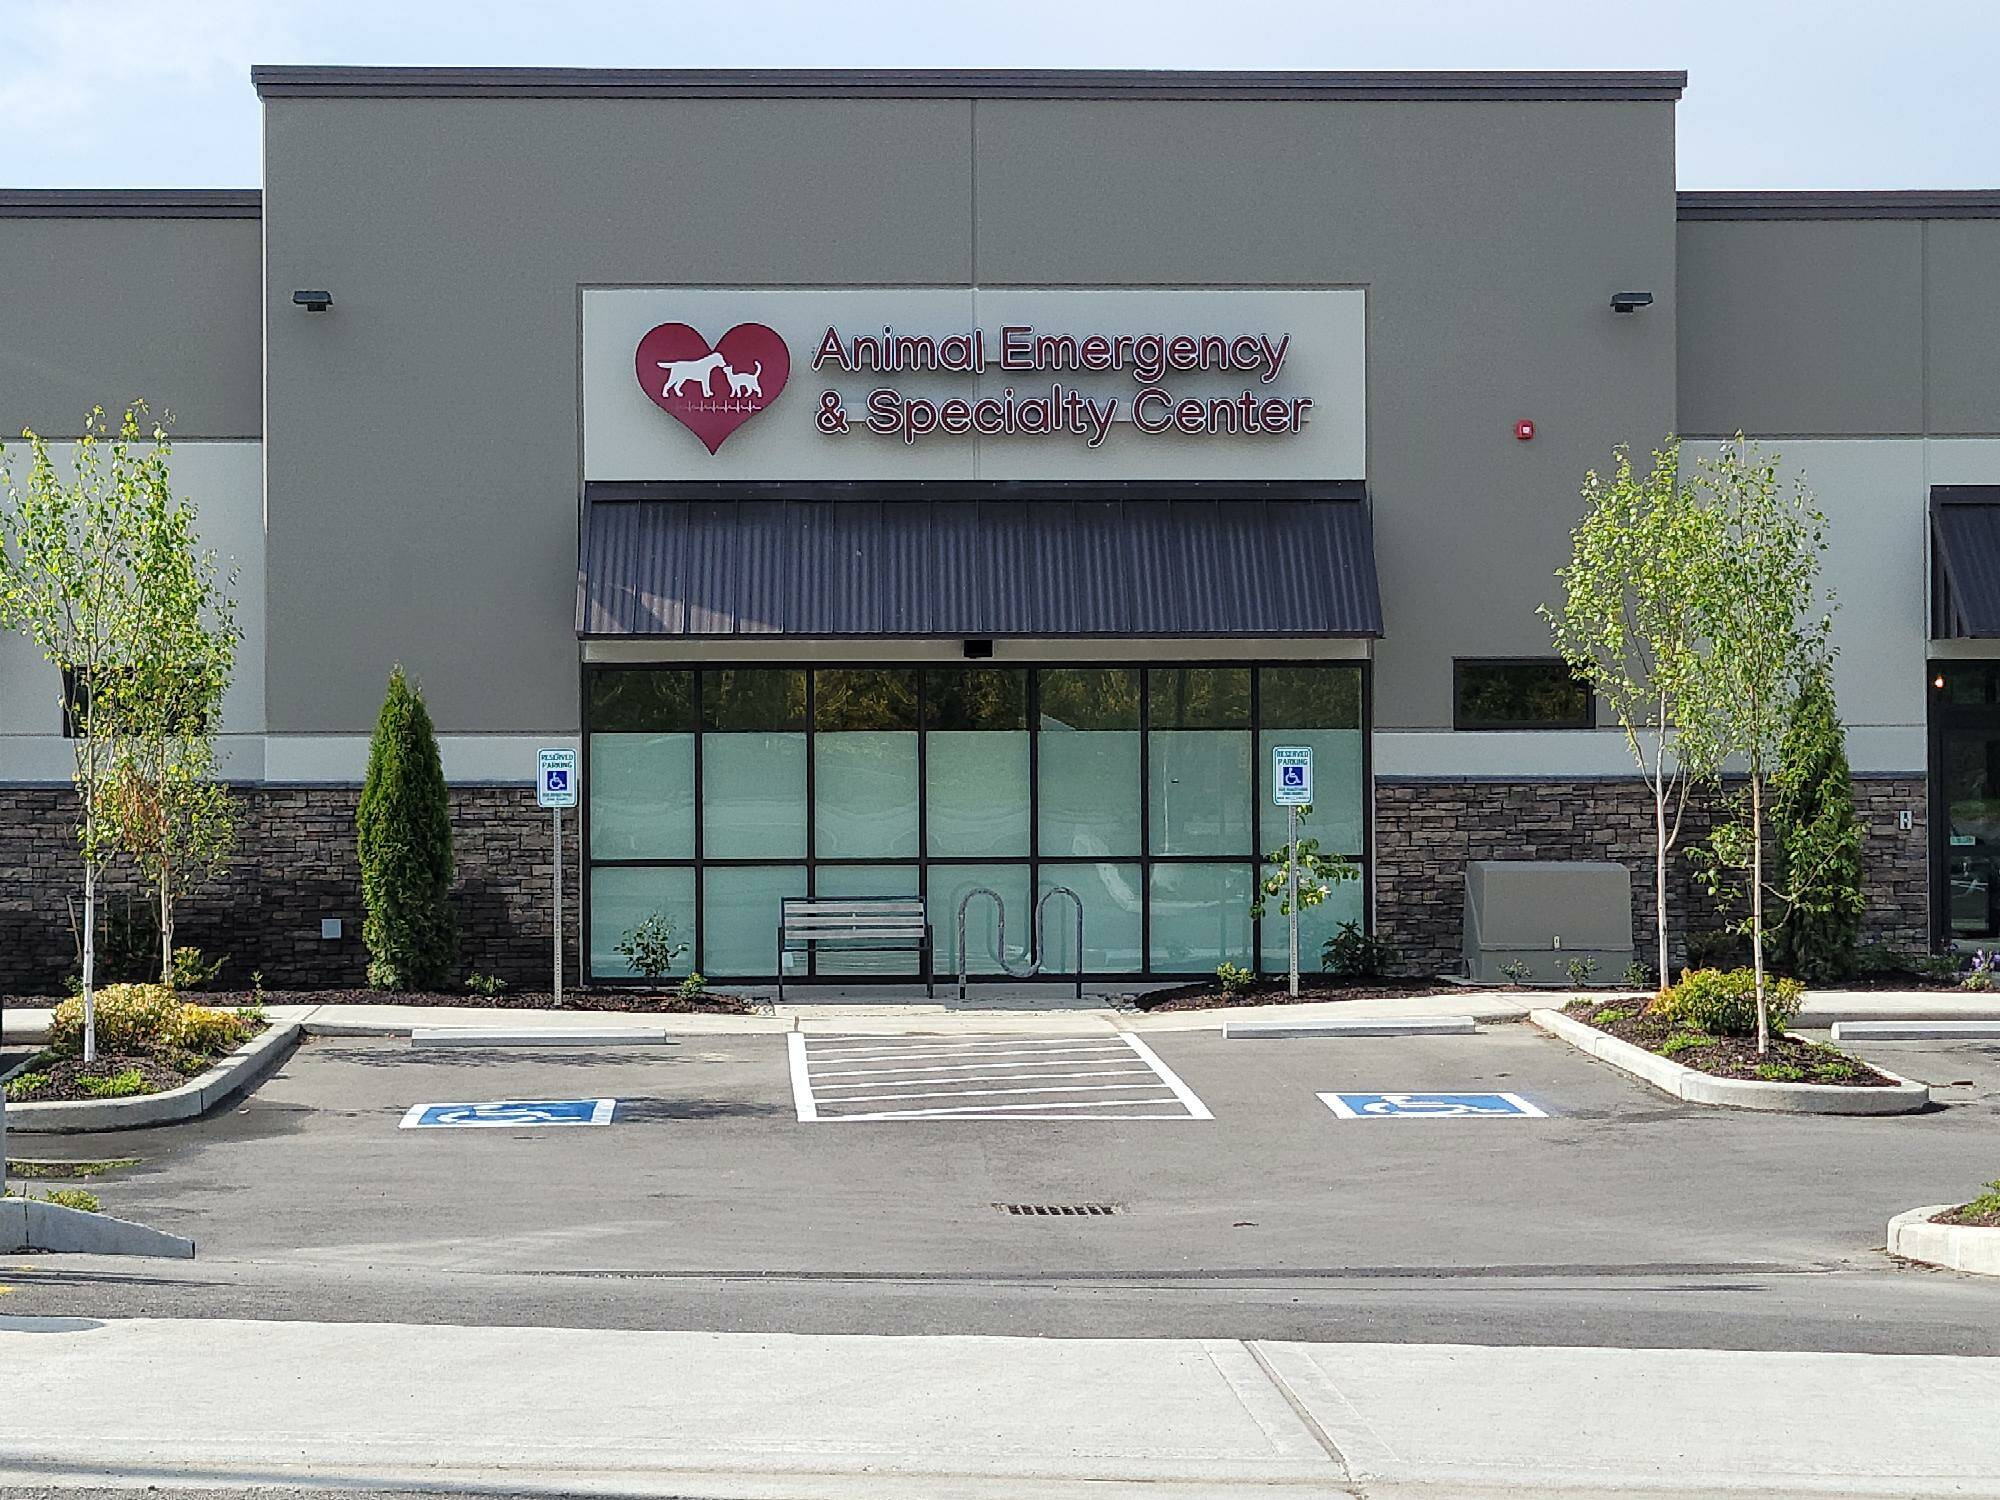 Animal Emergency & Specialty Center has expanded its services and is now located at College Marketplace in Poulsbo. Courtesy Photo